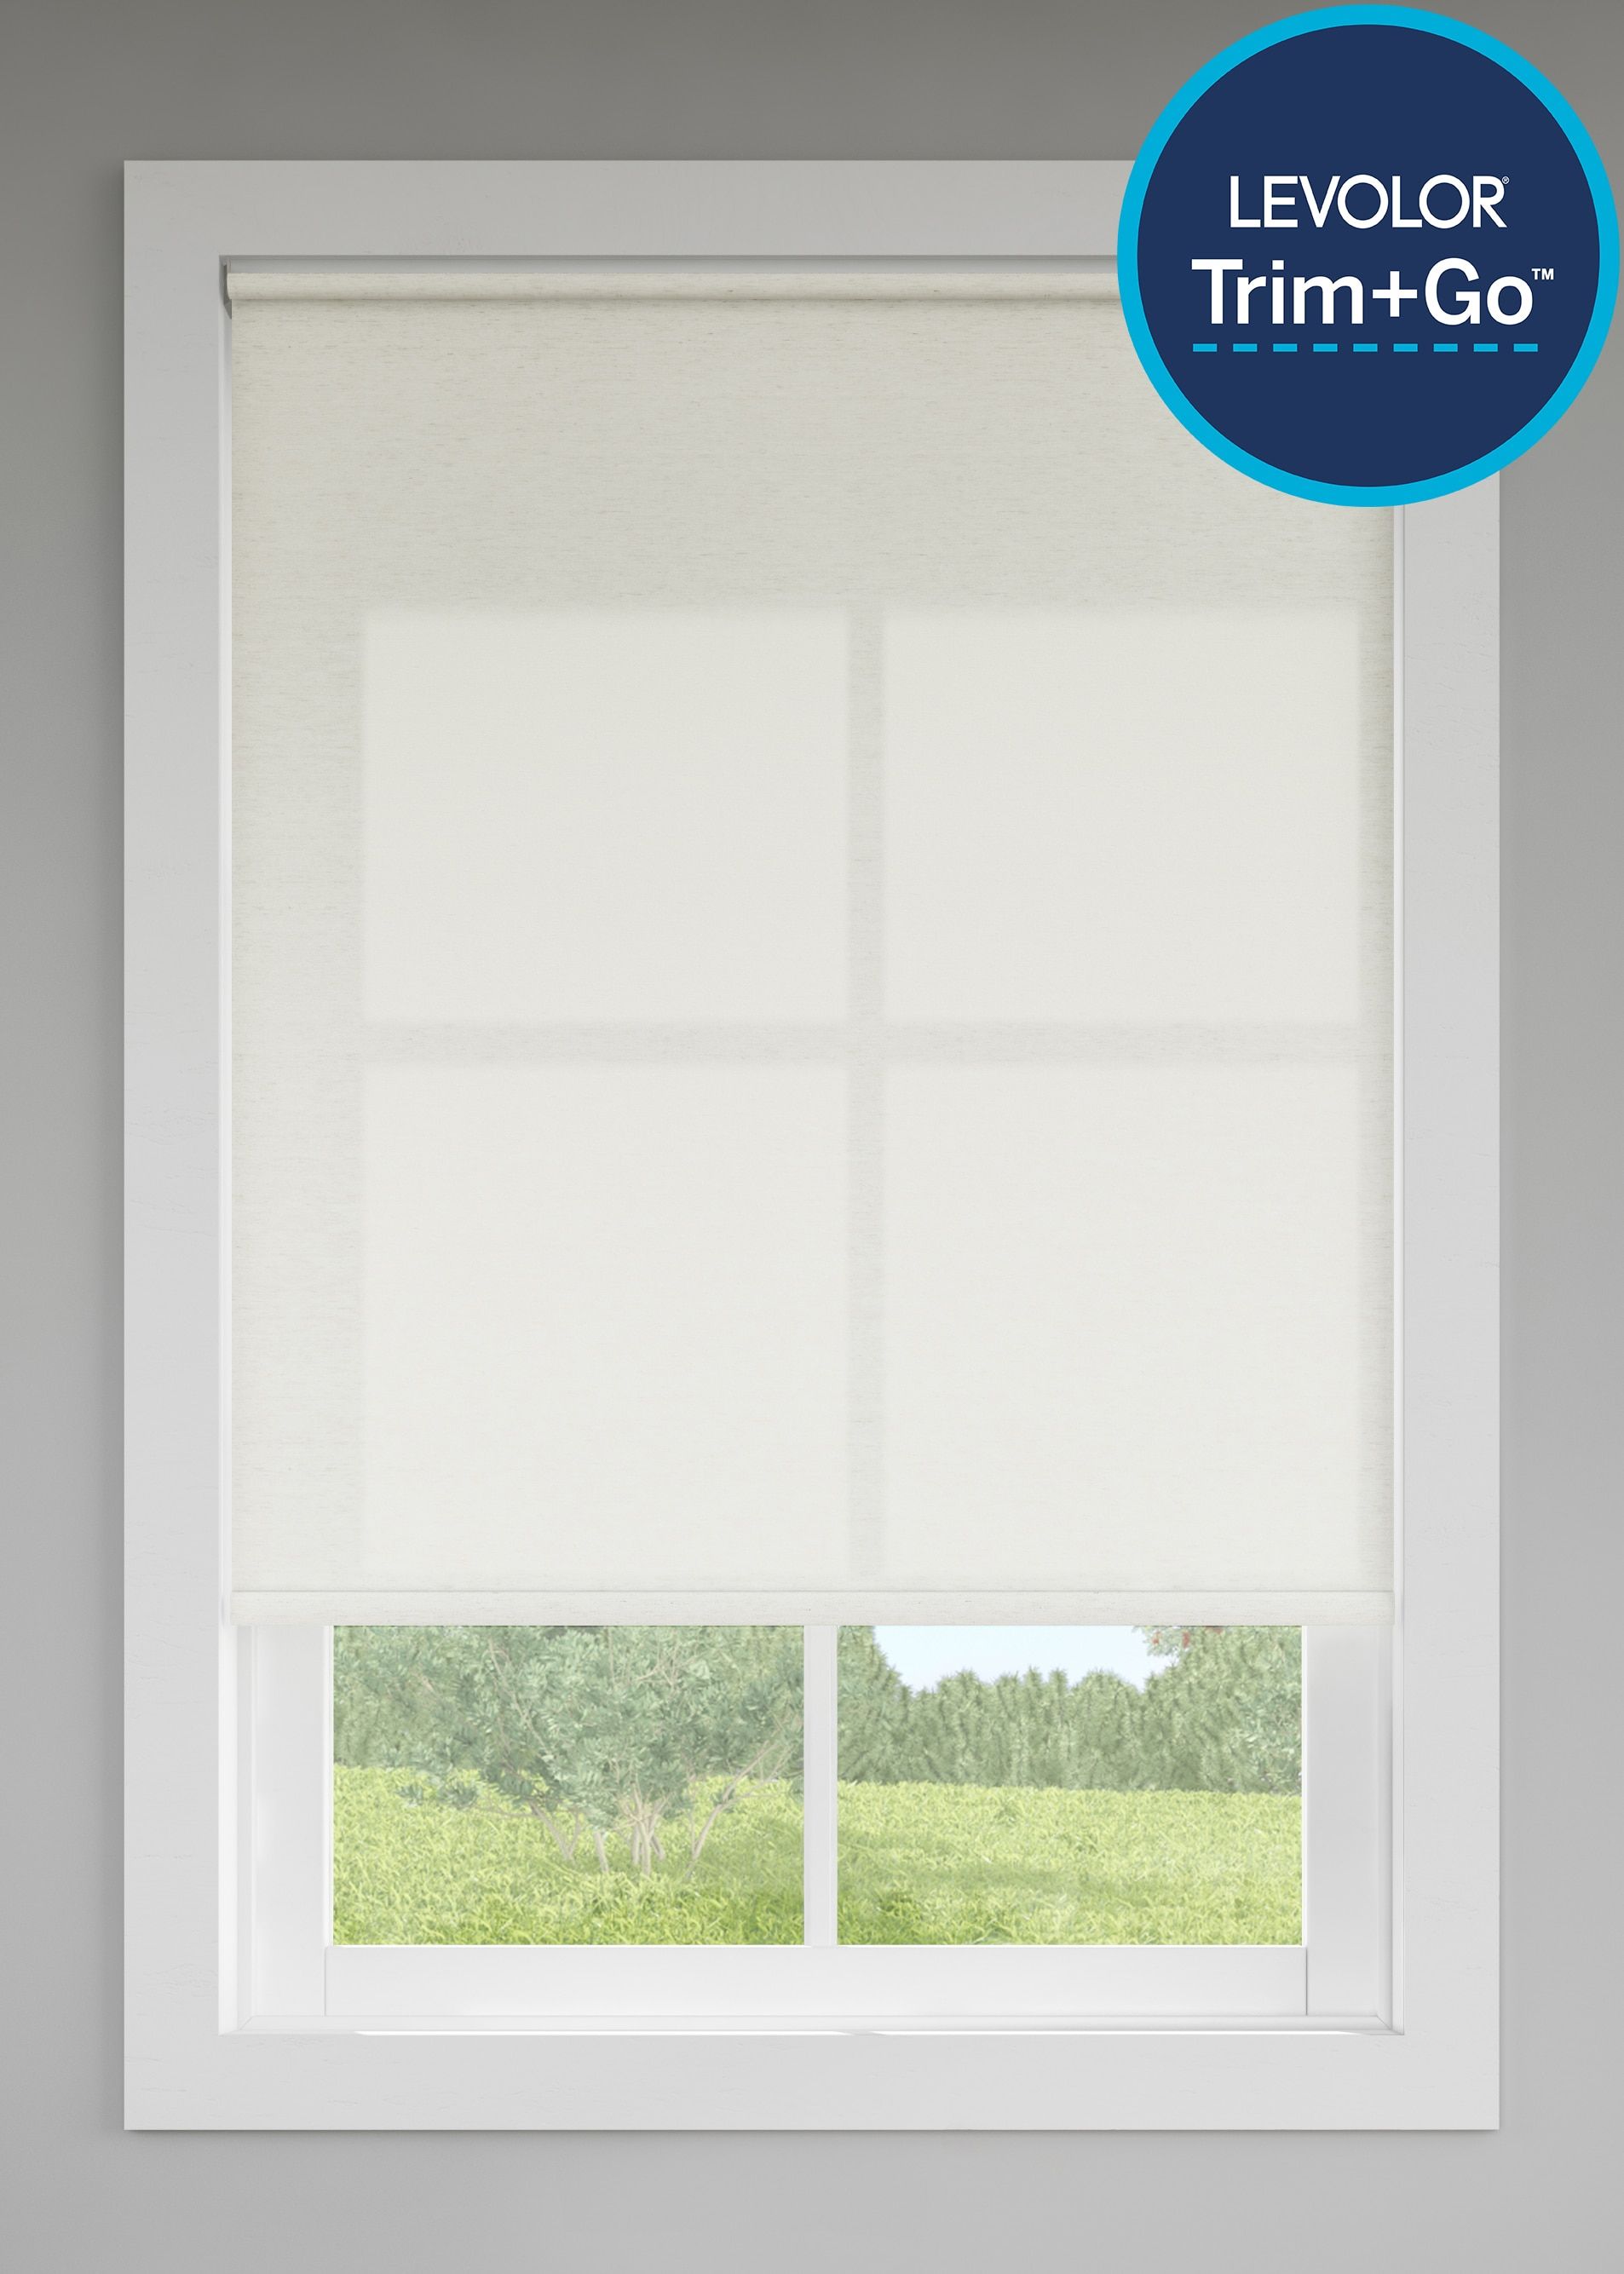 LEVOLOR Trim+Go 37-in x 72-in Seashell Light Filtering Cordless Roller Shade Lowes.com | Lowe's